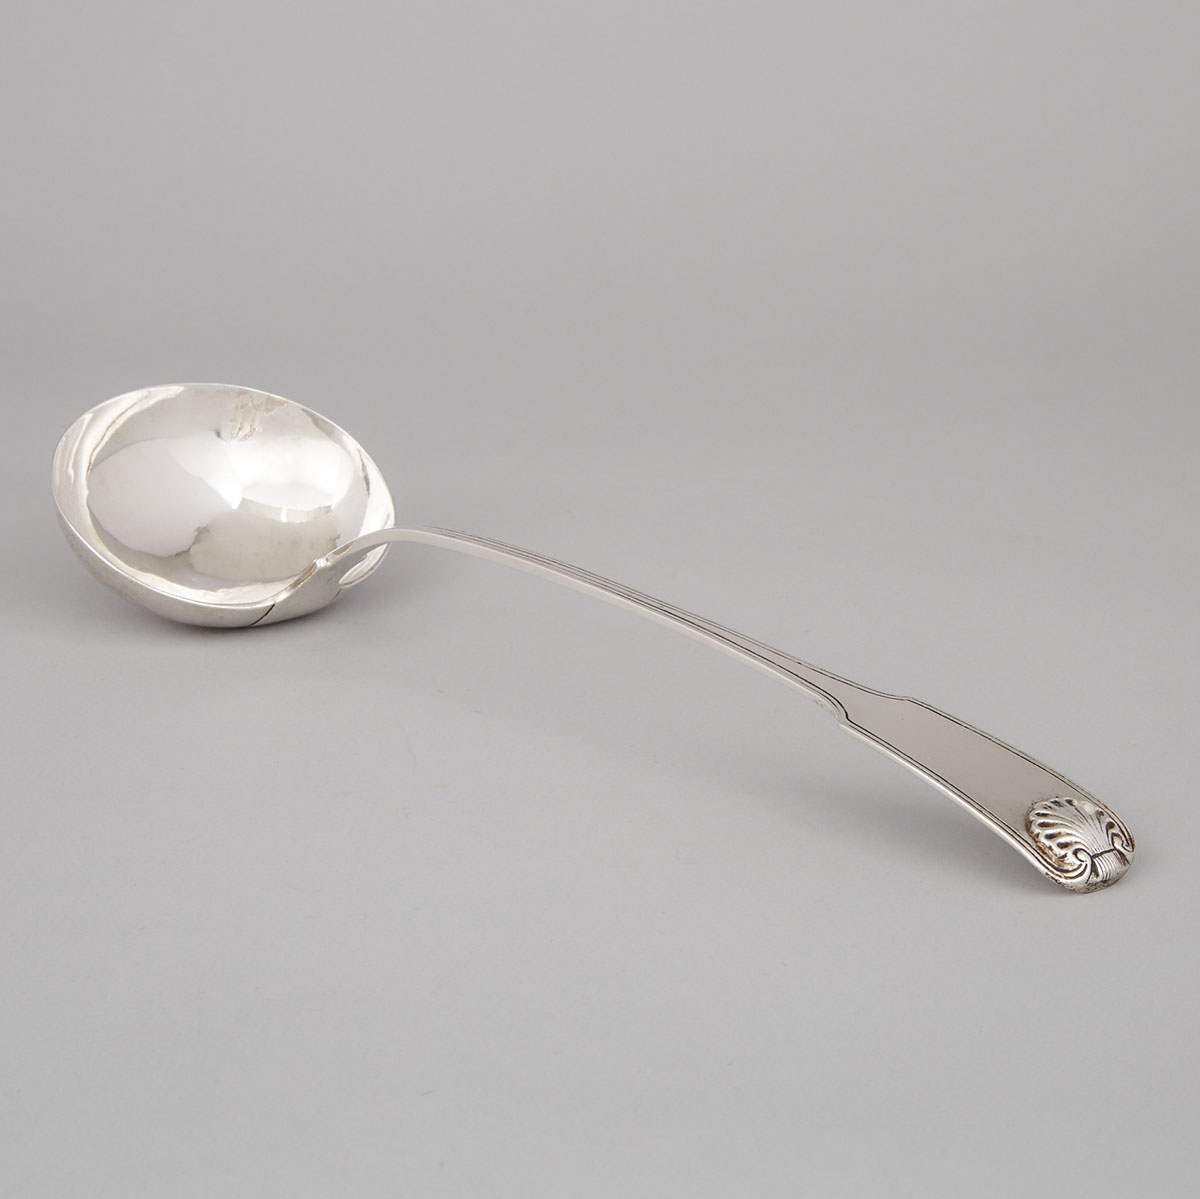 Indian Colonial Silver Fiddle, Thread & Shell Pattern Soup Ladle, Hamilton & Co., c.1830